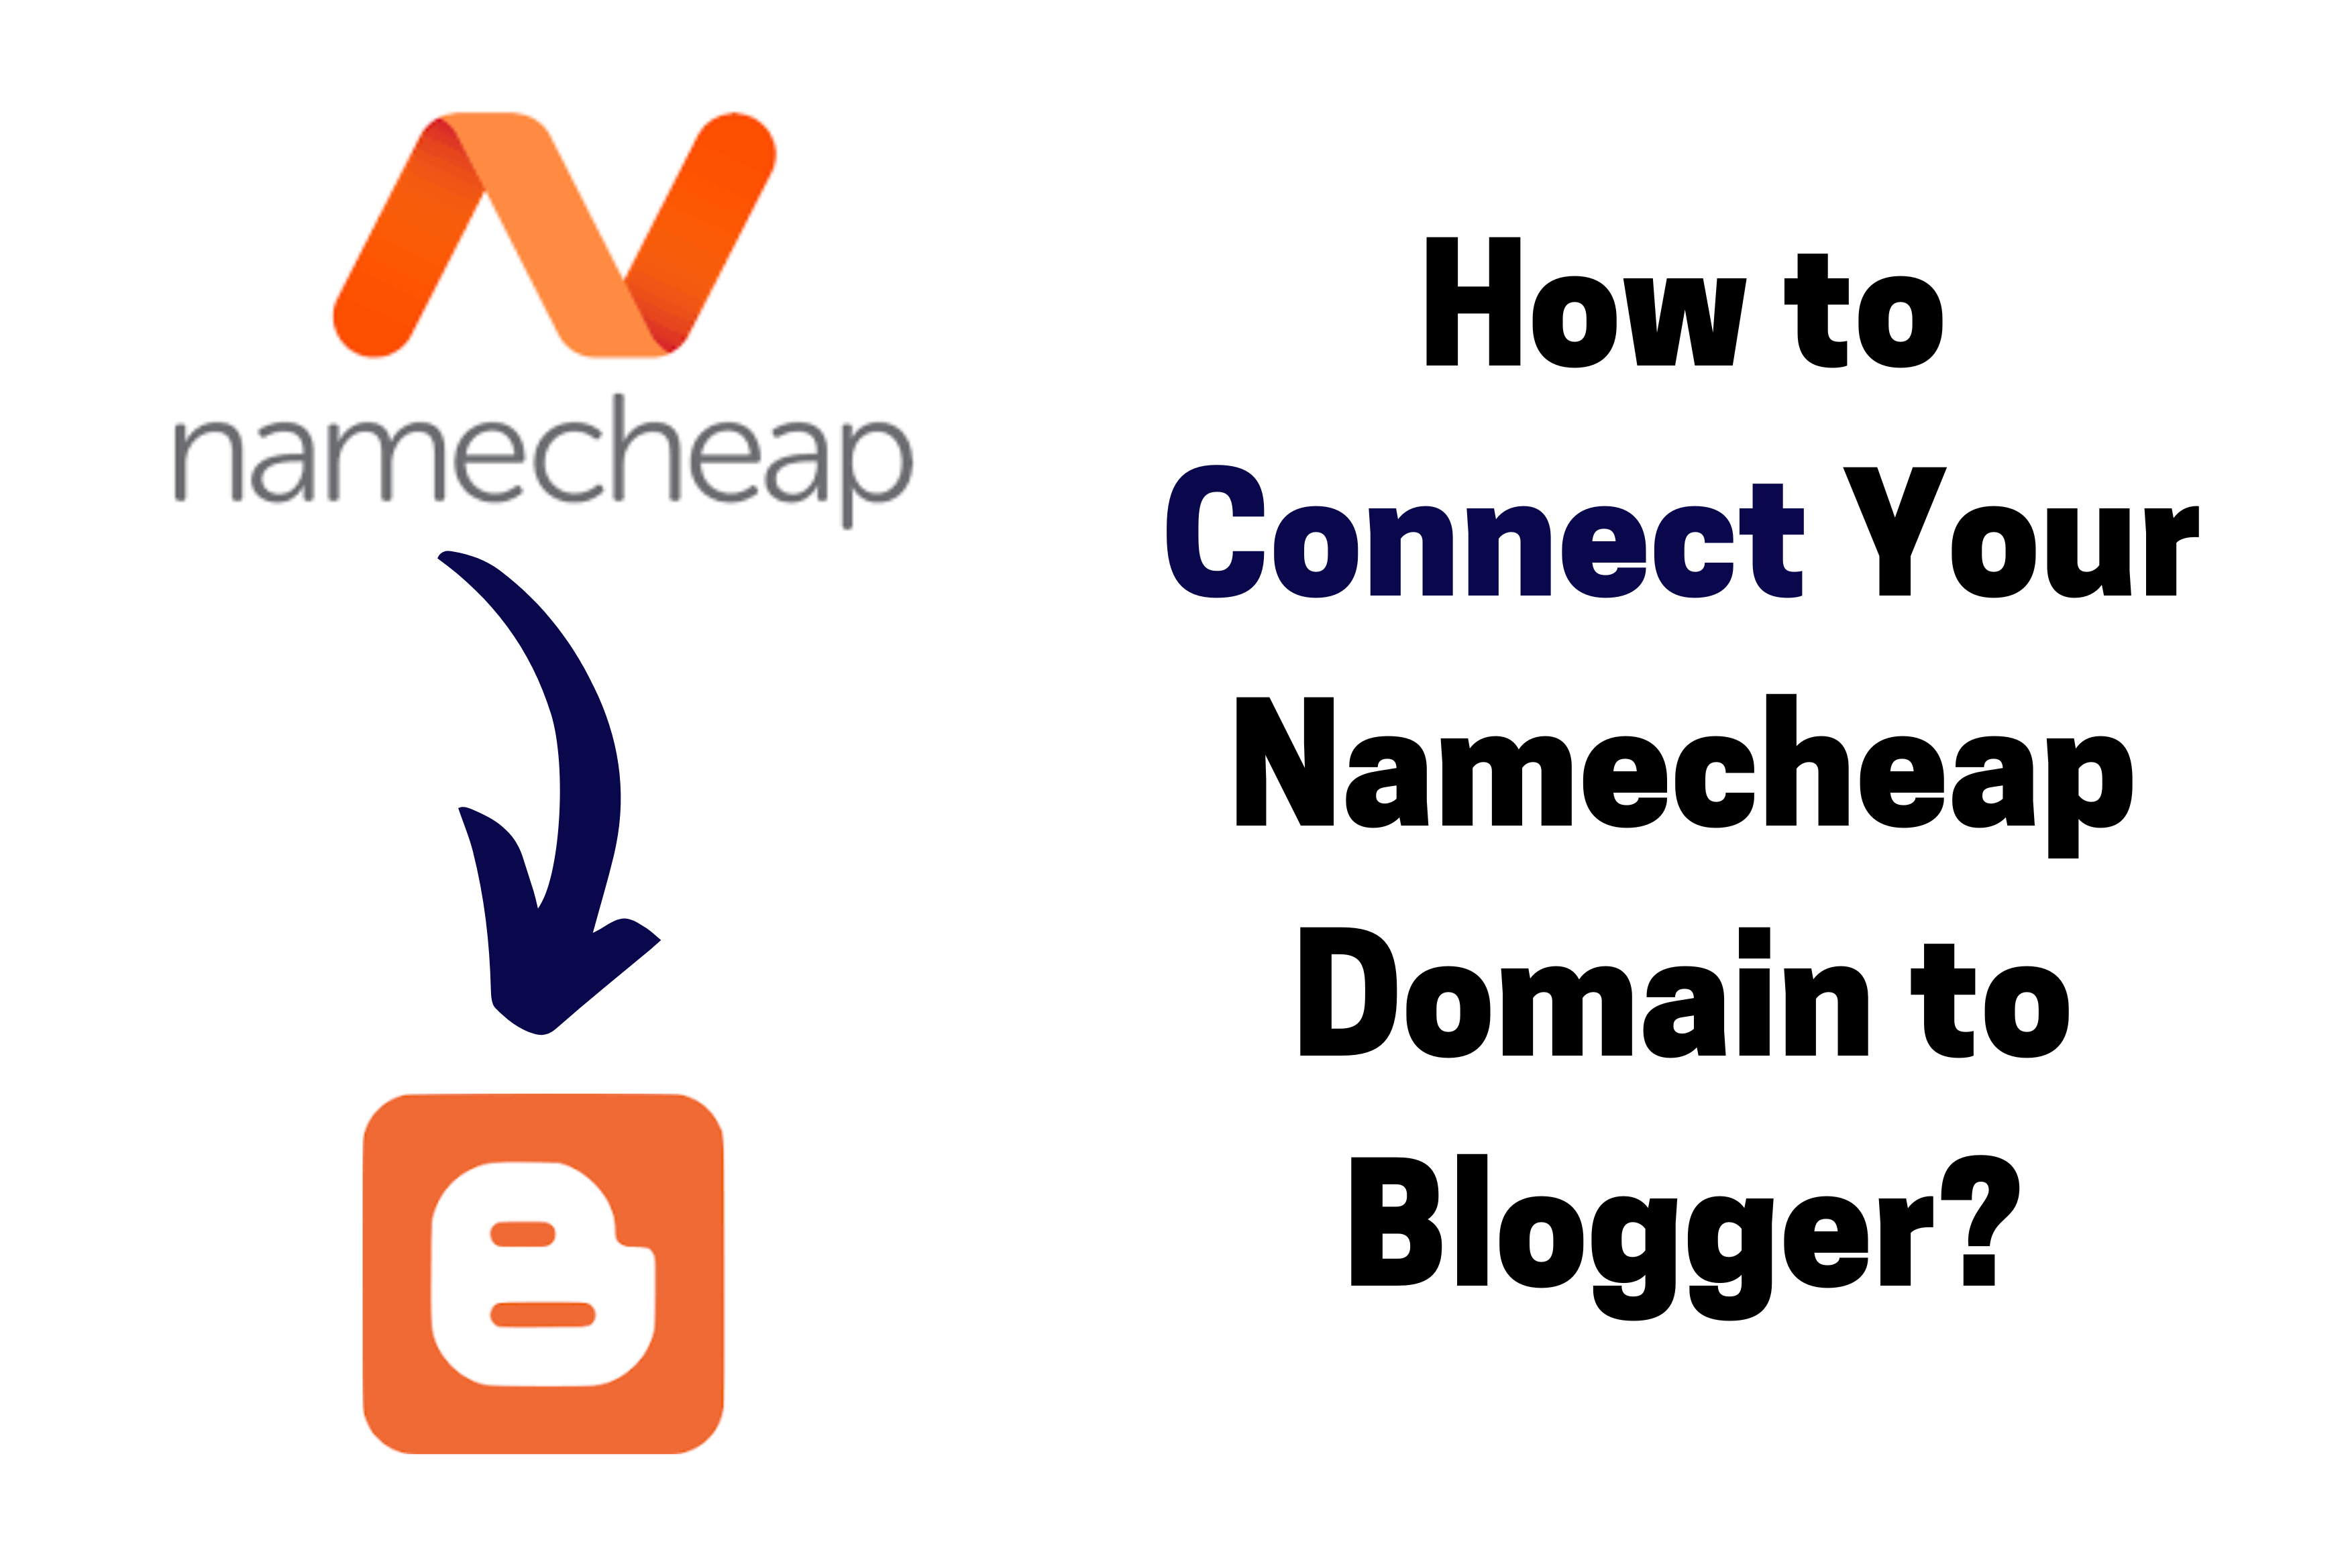 How to Connect Your Namecheap Domain to Blogger?